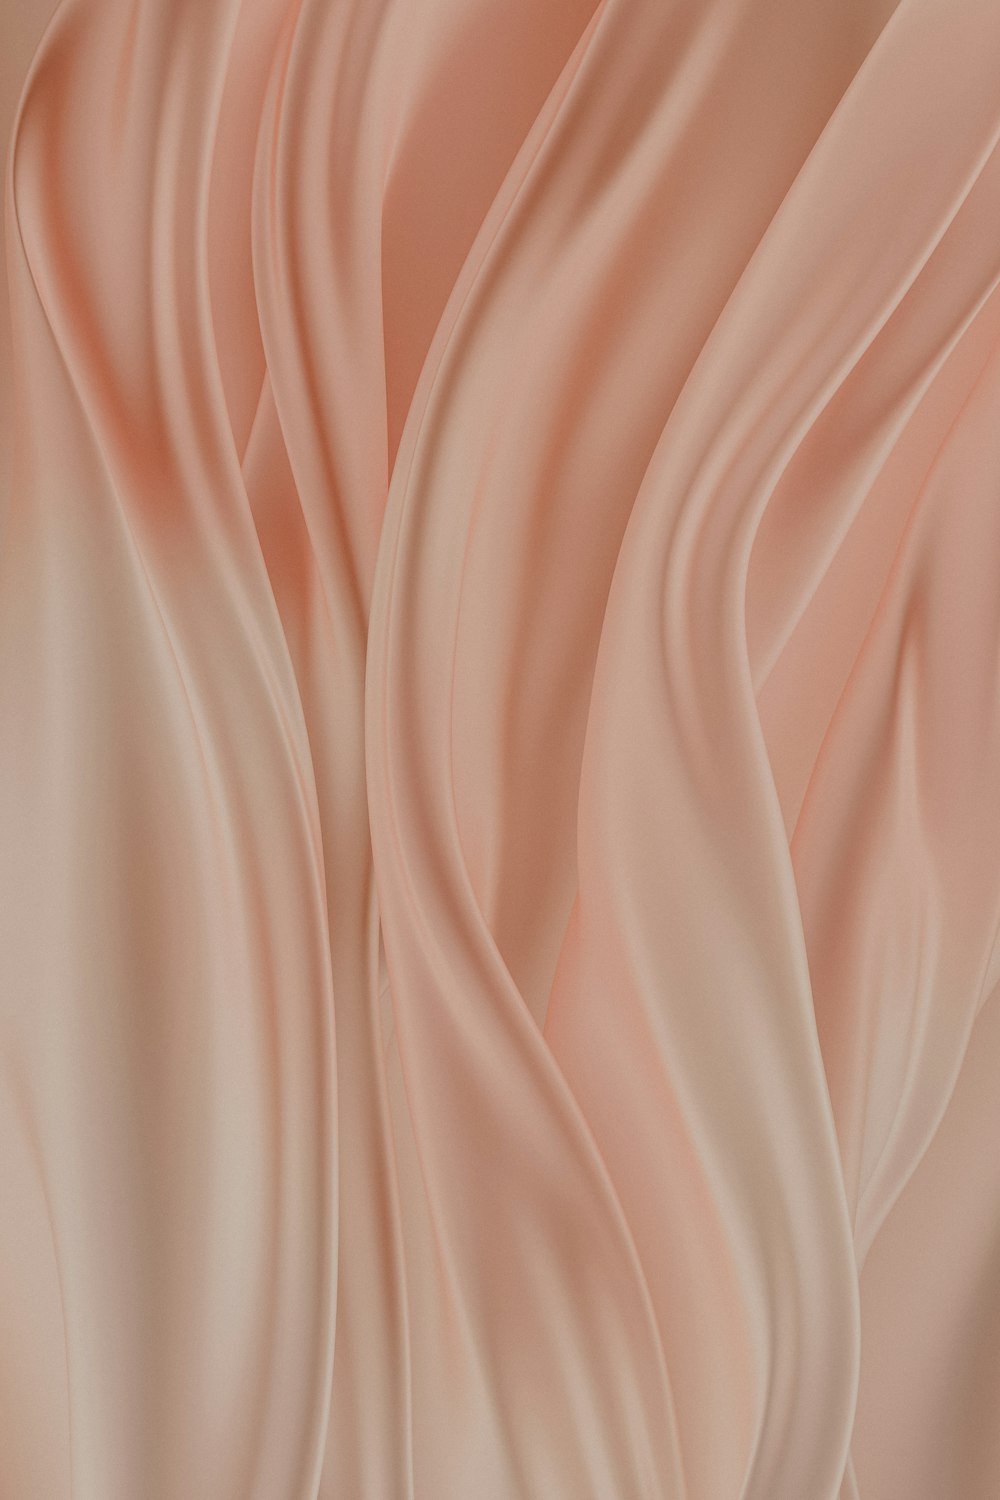 a soft pink background with wavy folds